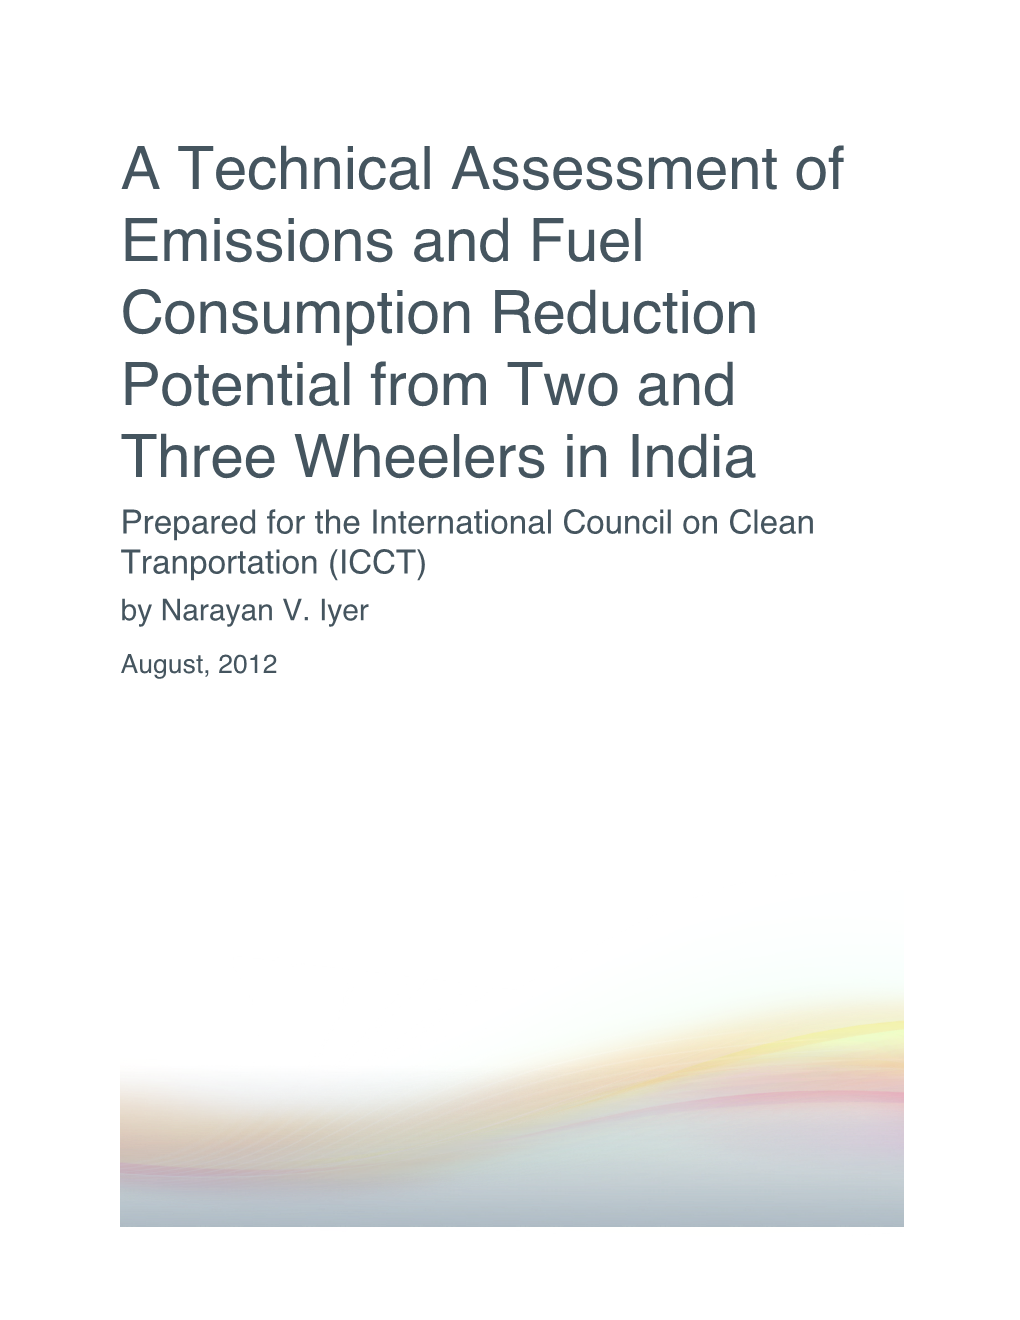 A Technical Assessment of Emissions and Fuel Consumption Reduction